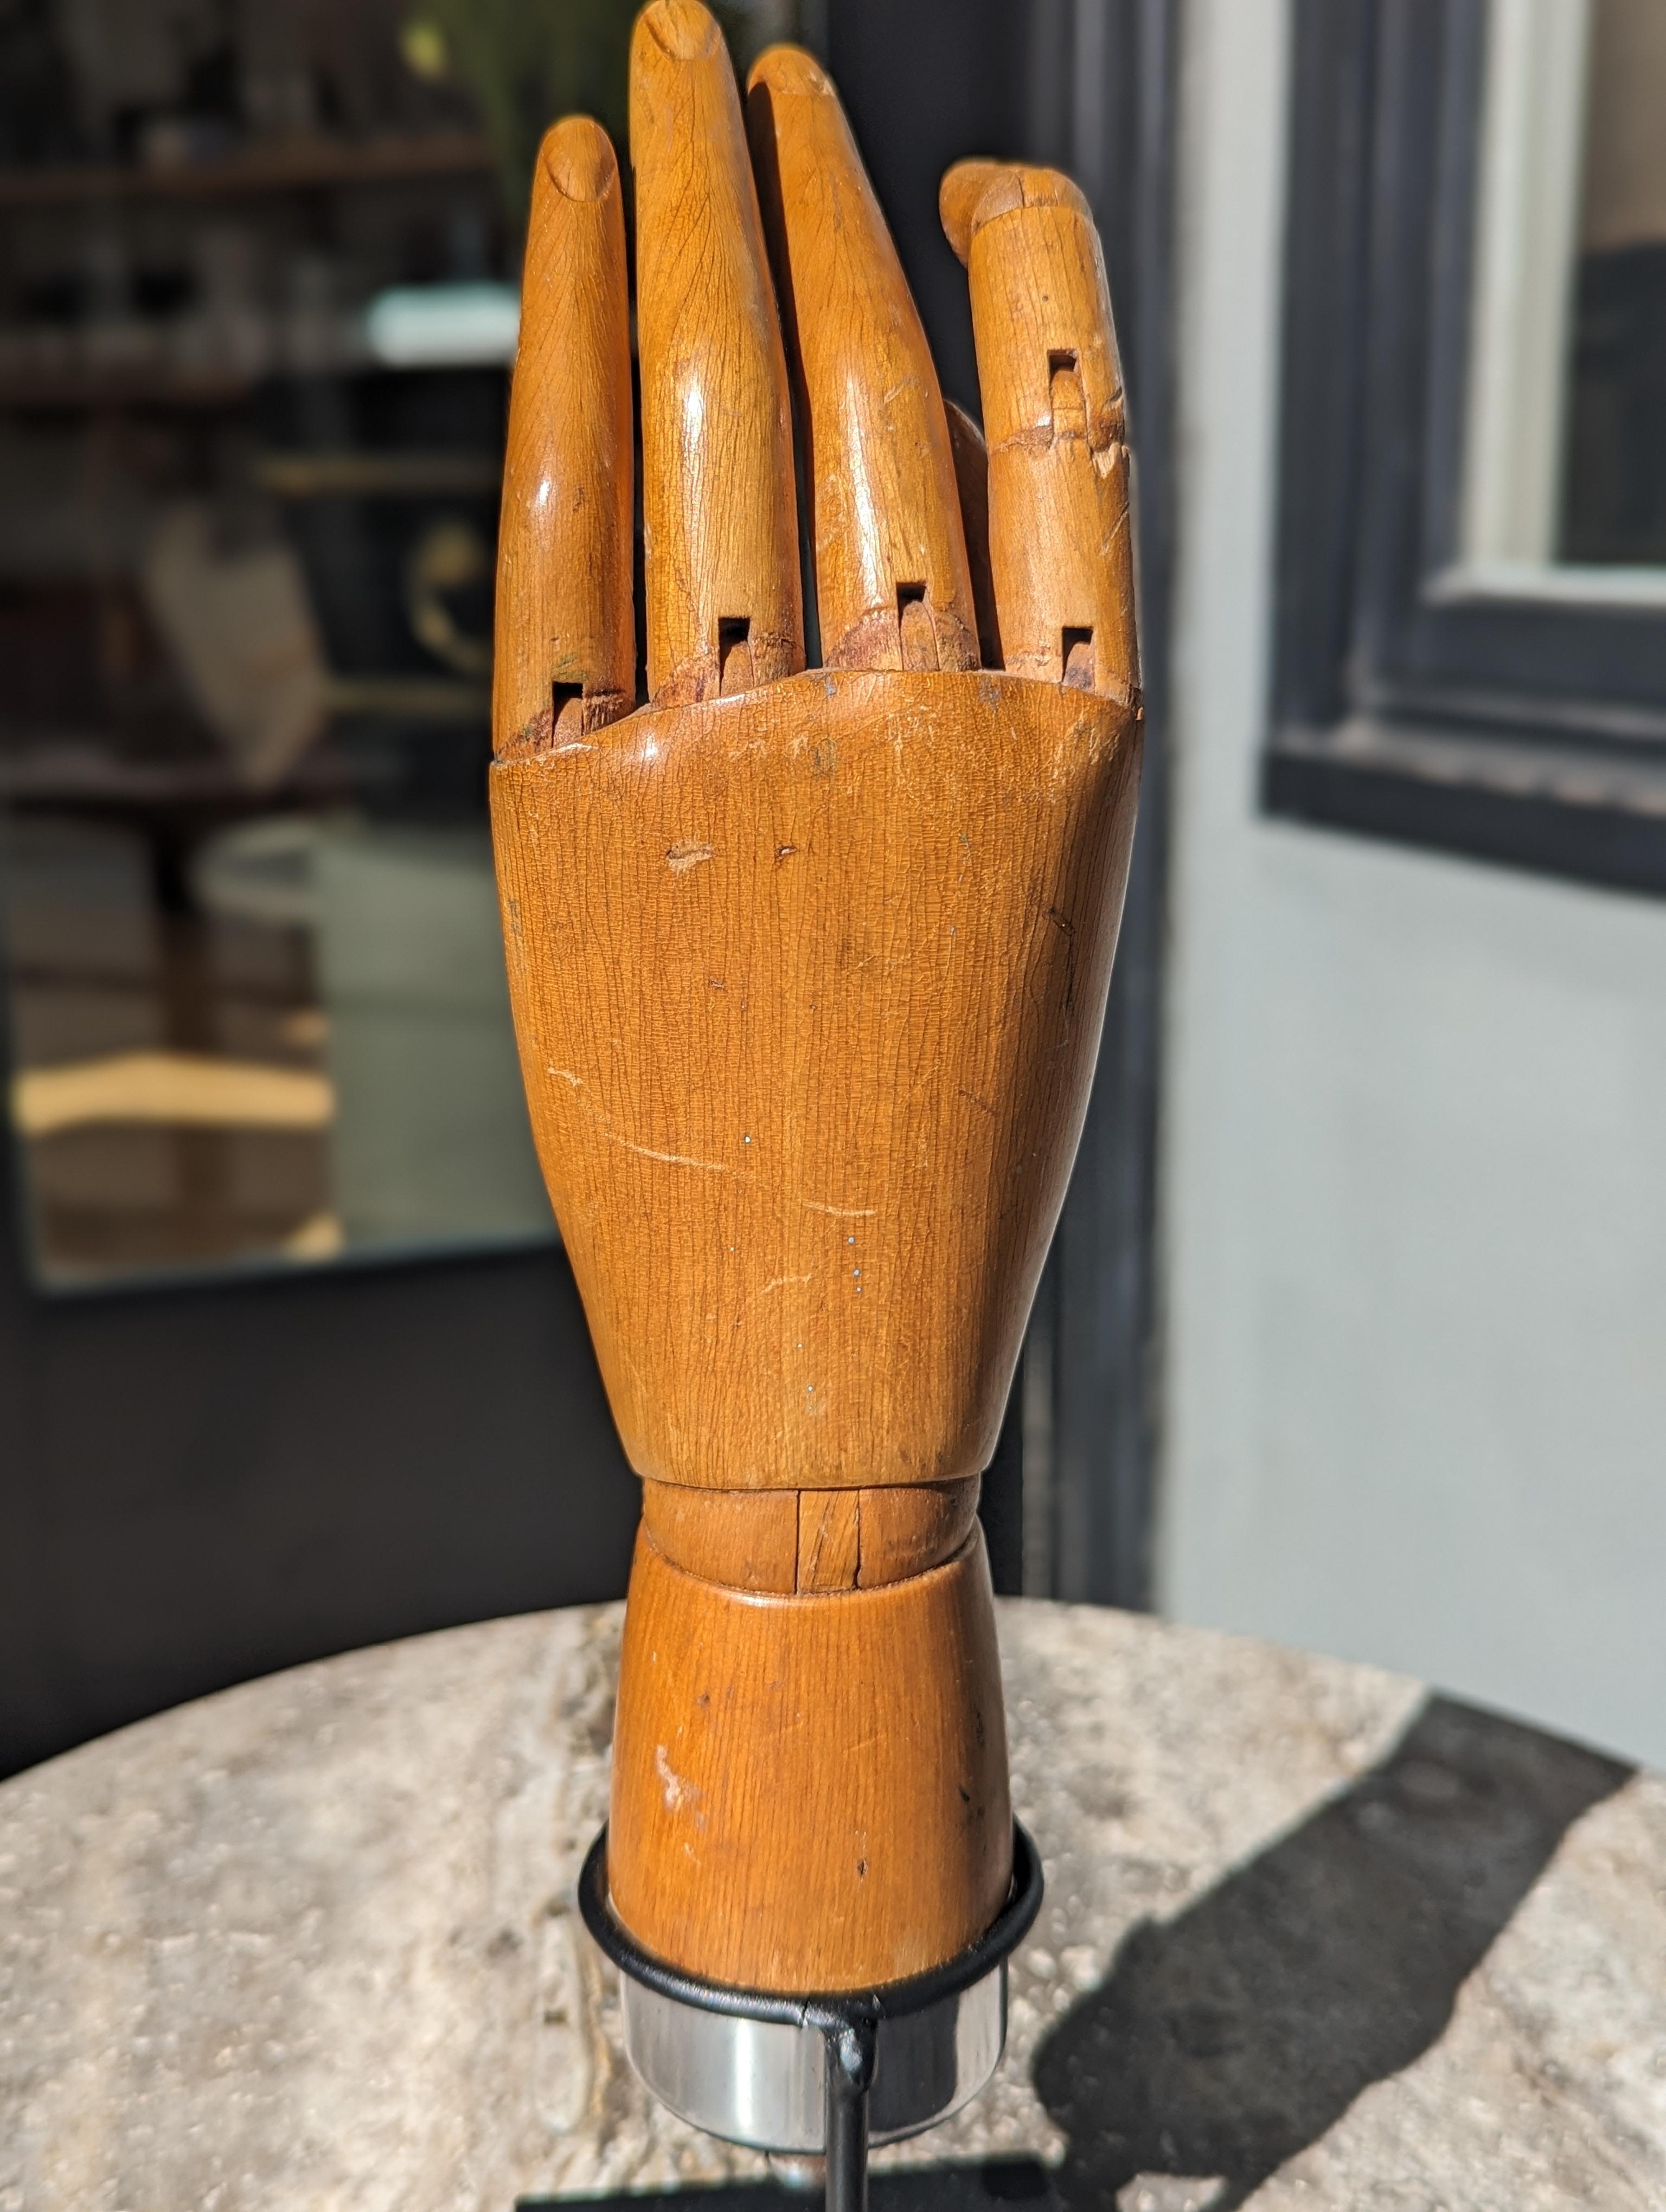 C.1900 Articulated Wooden Hands - Artist's Model or Display For Sale 2